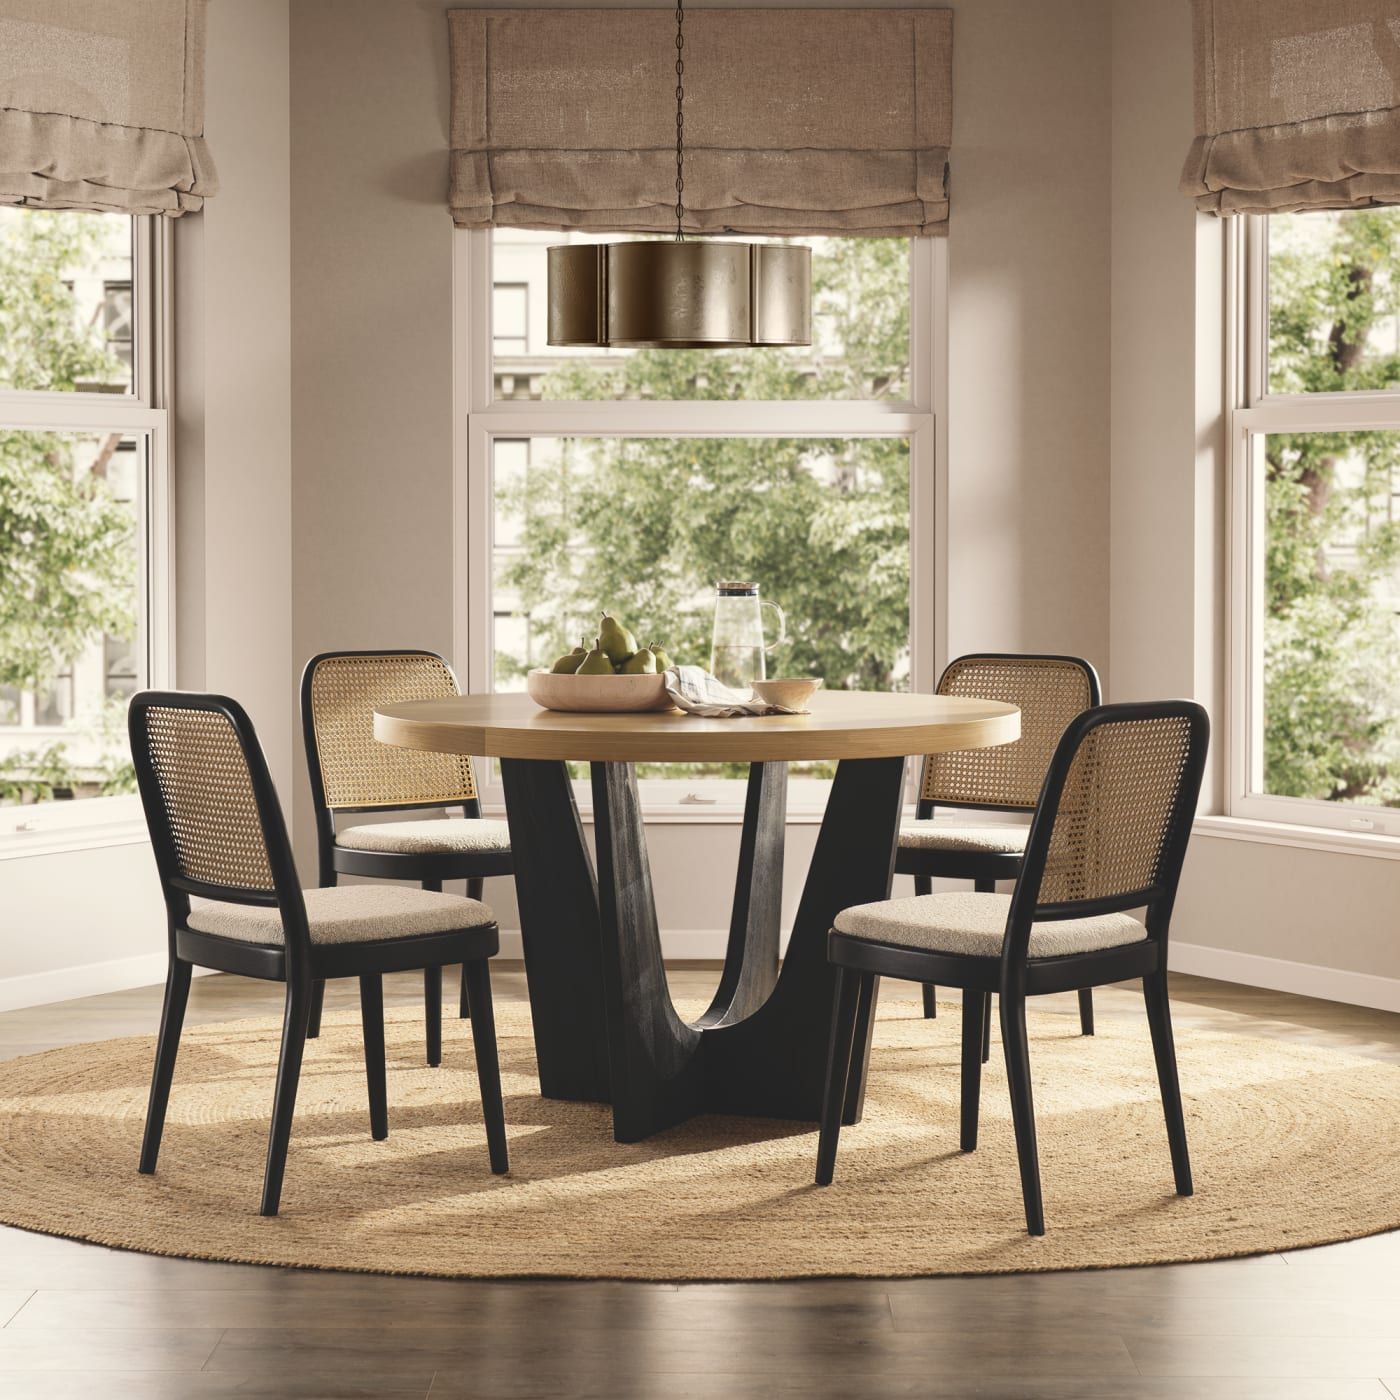 Sawyer Round Dining Table with 4 Edith Cane Chairs, BlackSale | Castlery US